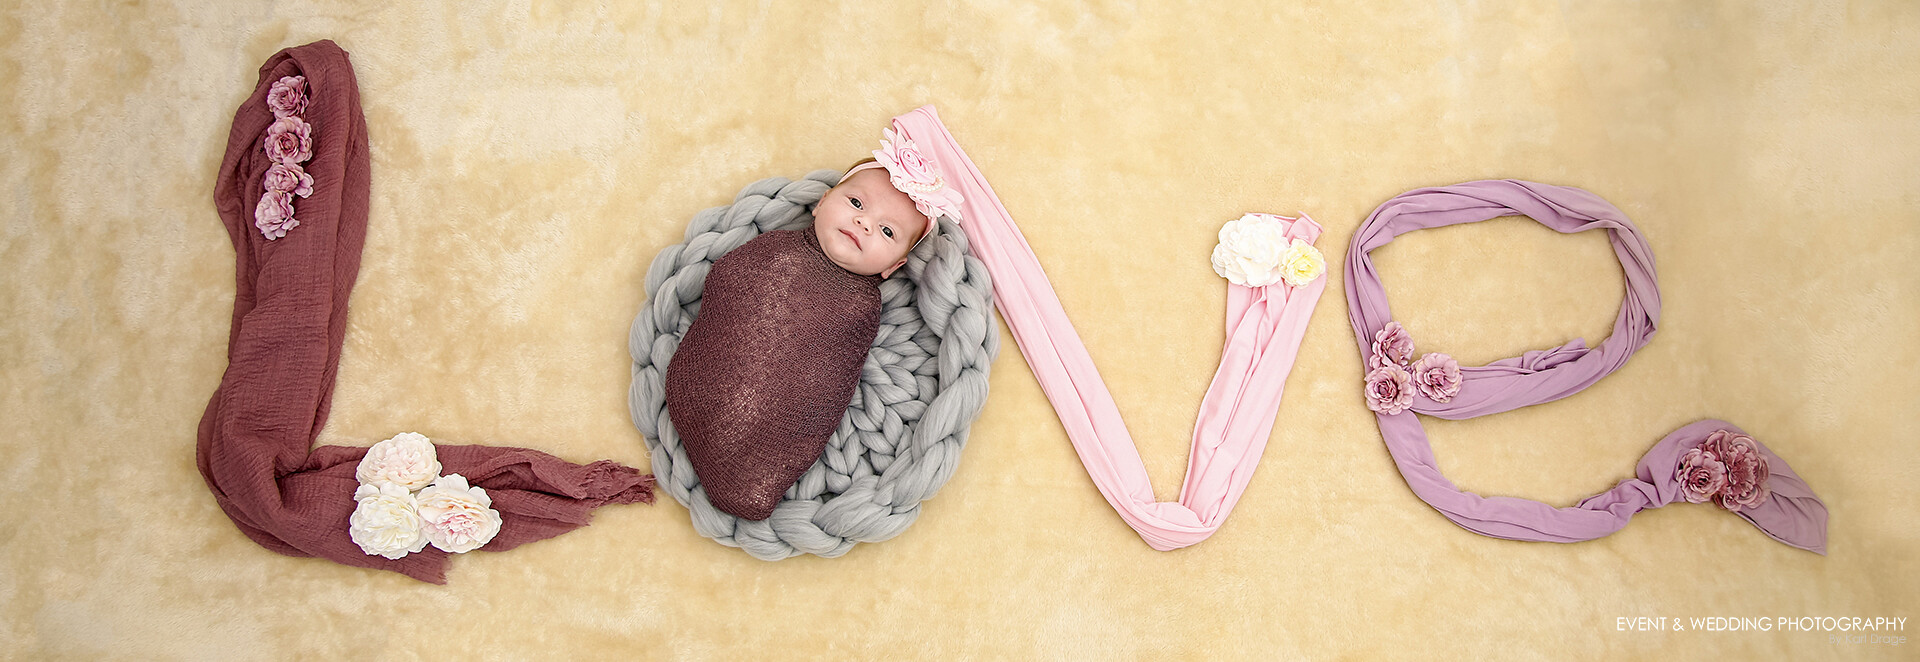 Newborn baby girl laying in a photography setup spelling the word Love in fabrics